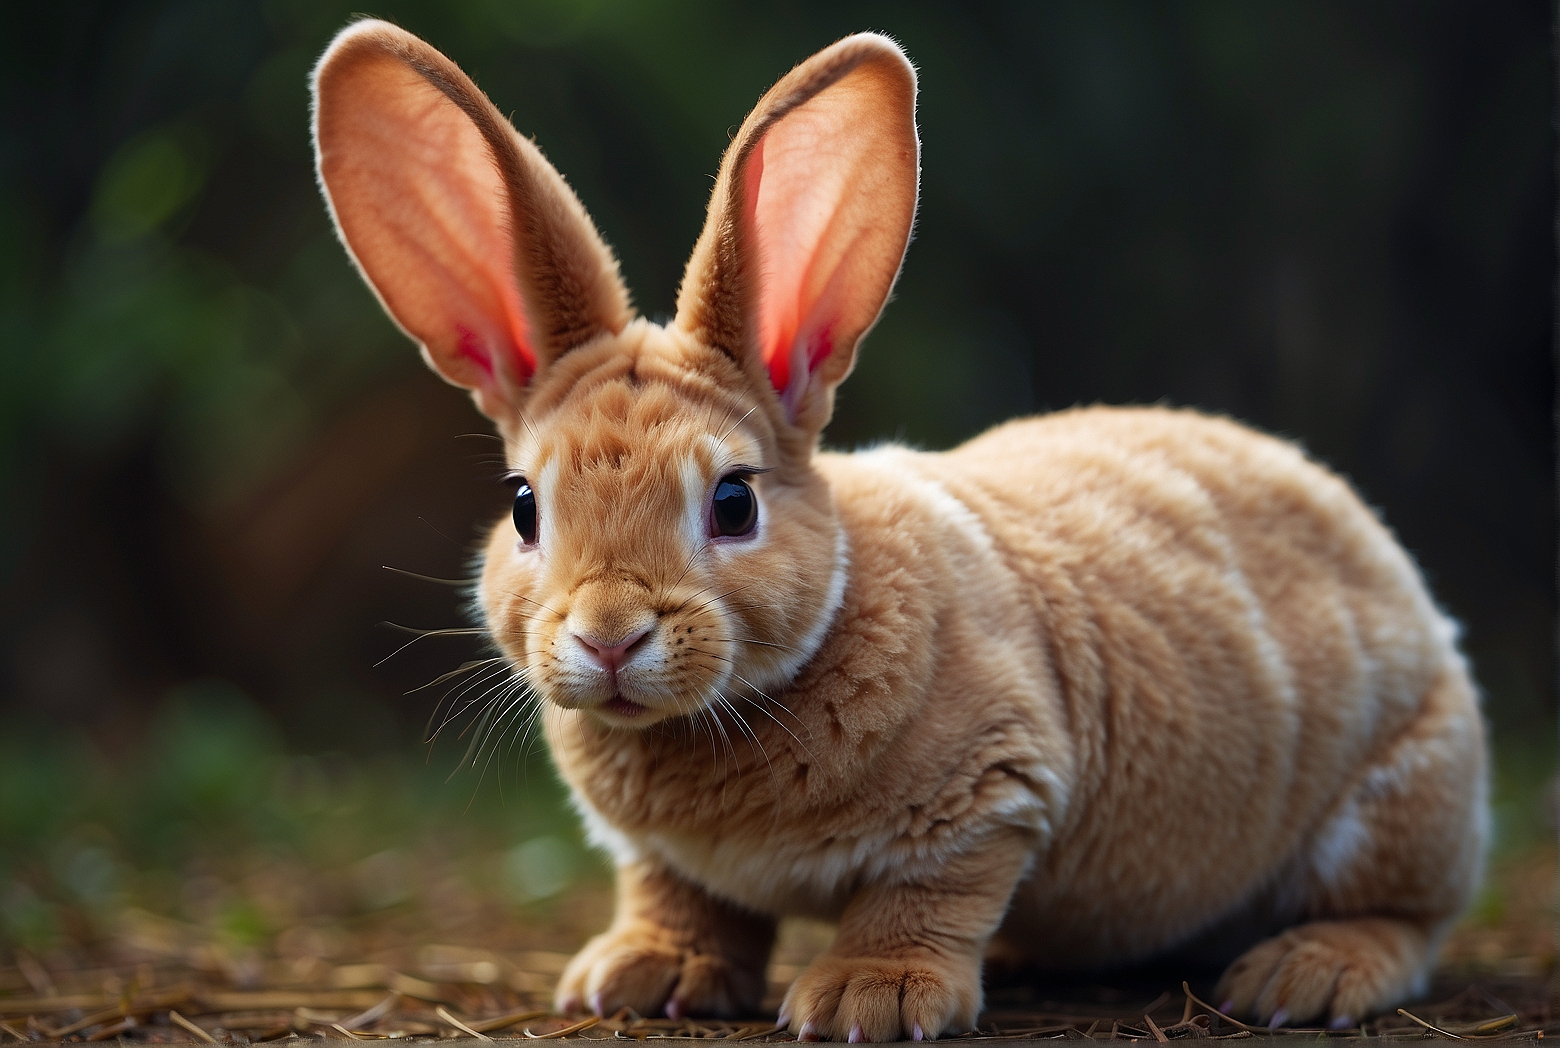 How much does a Mini Rex rabbit cost?